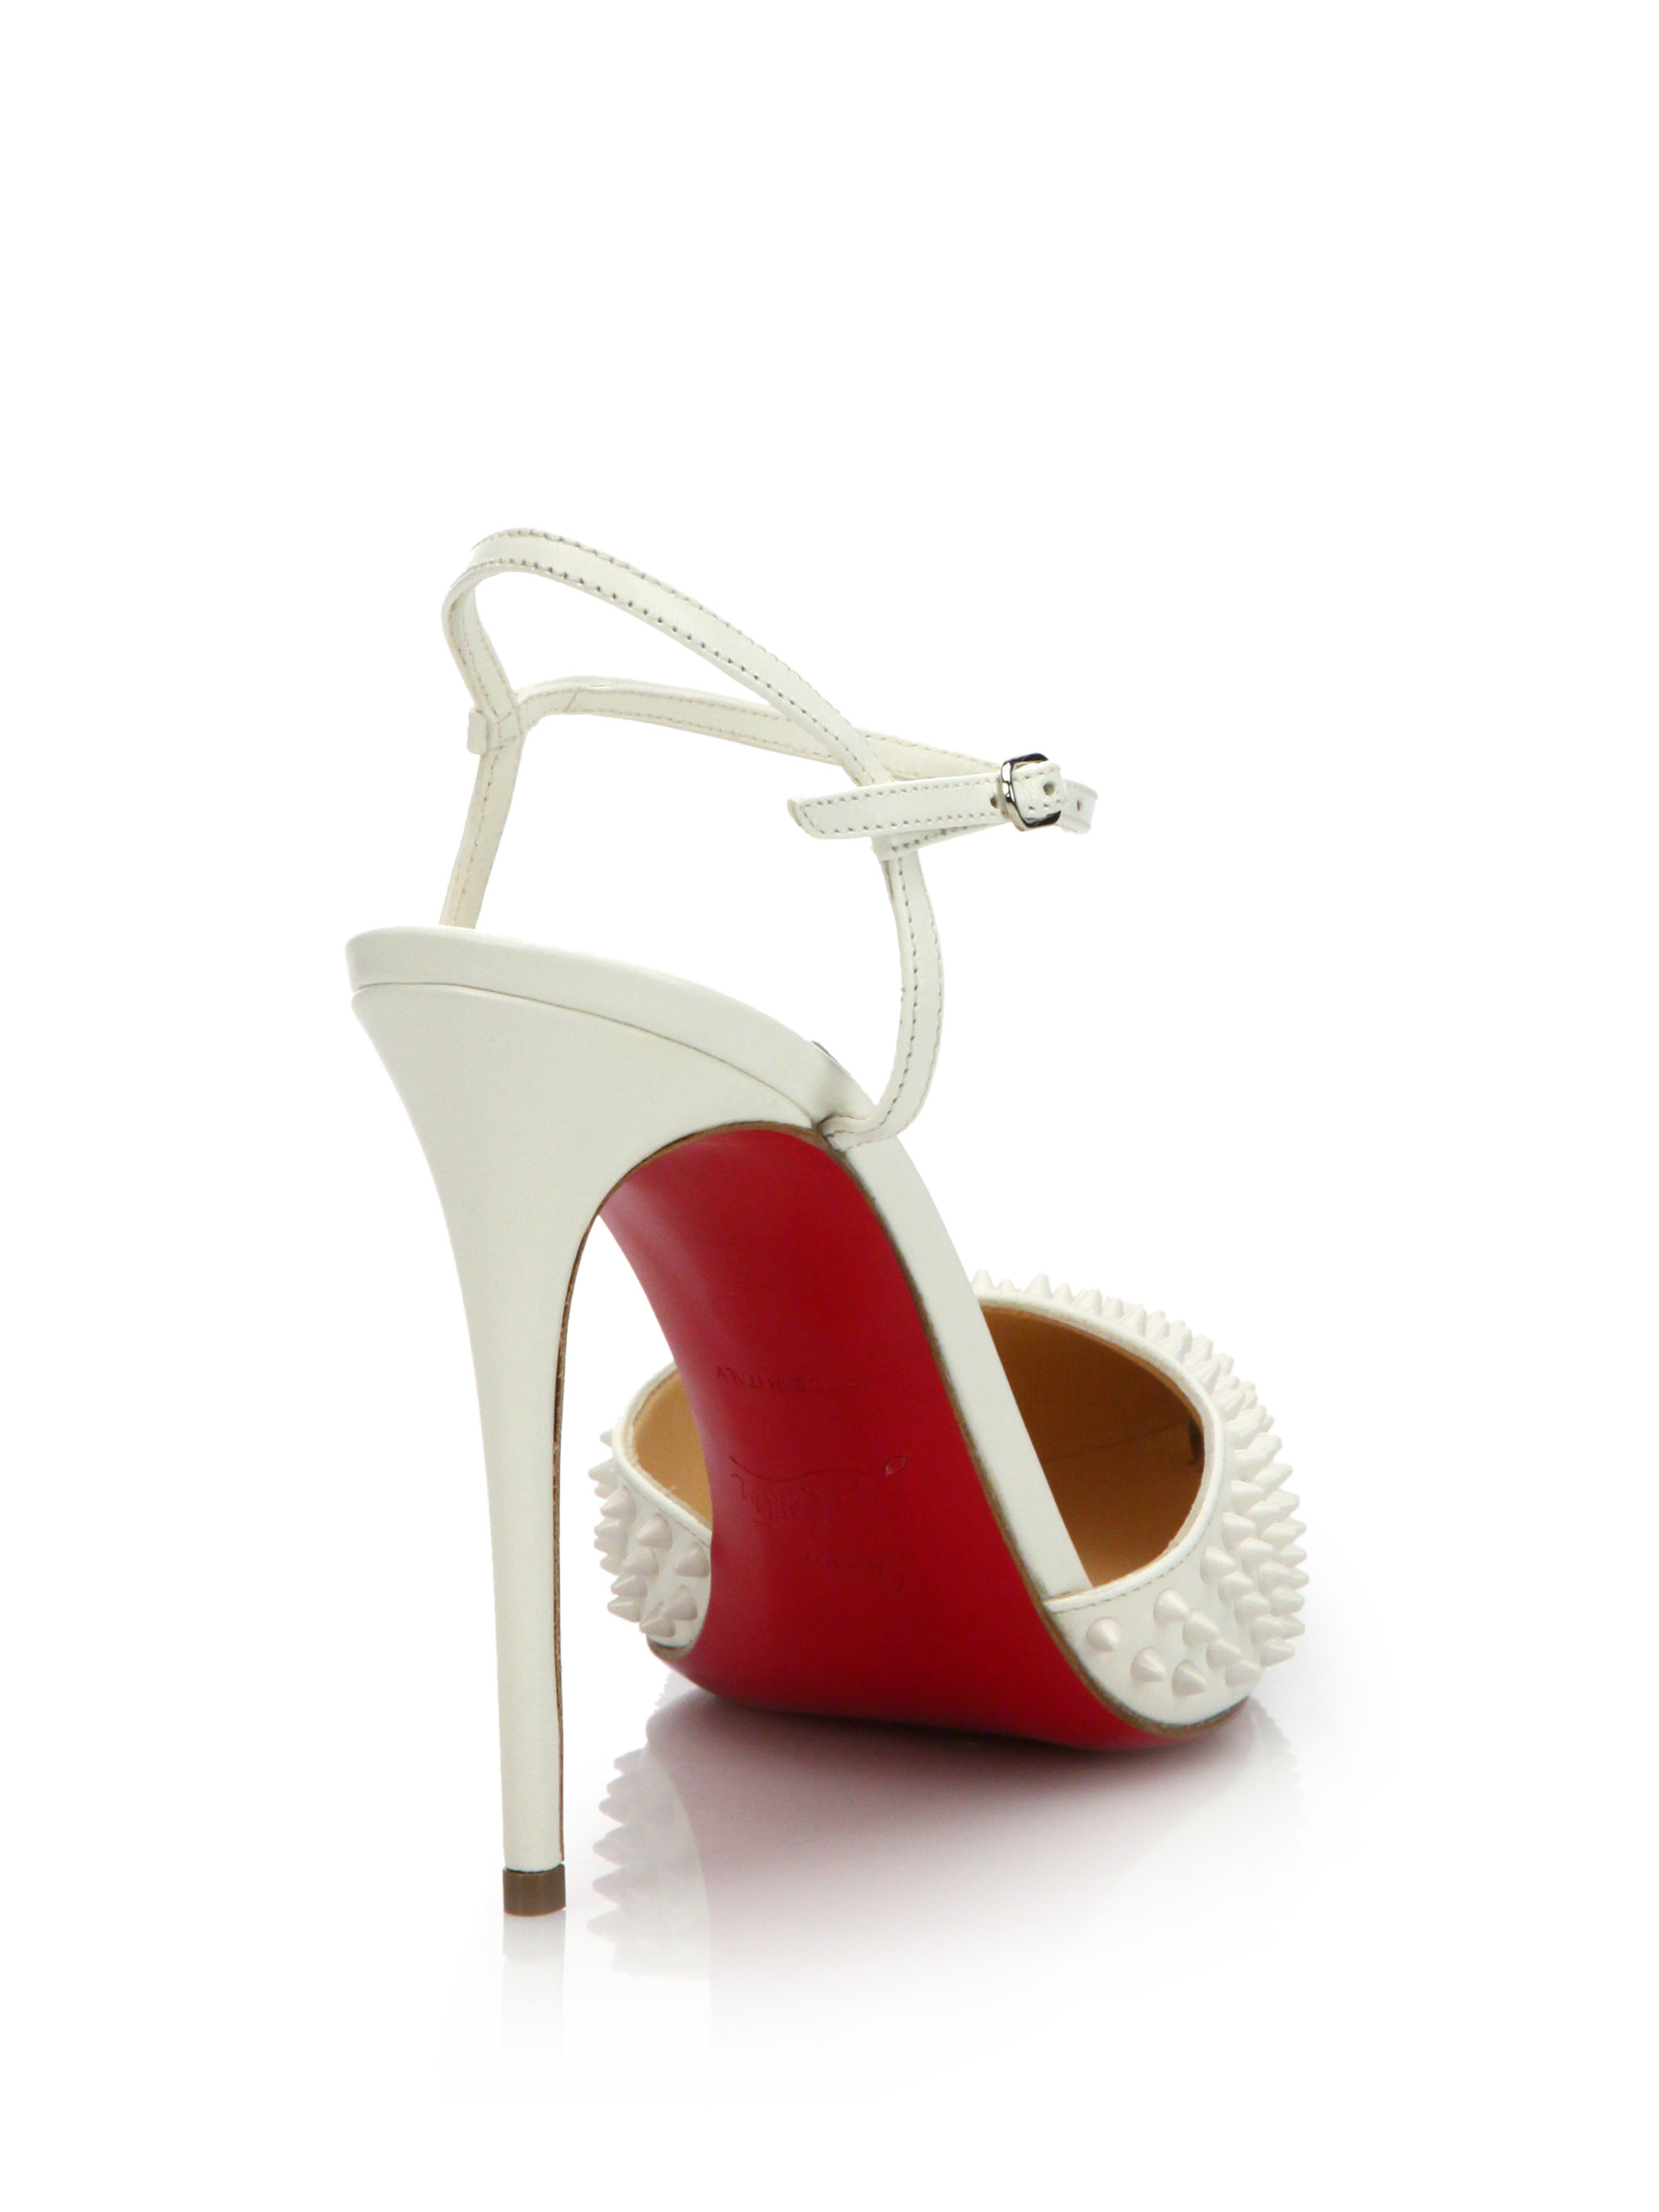 usa replica shoes - Christian louboutin Spiked Patent Leather Slingback Pumps in White ...